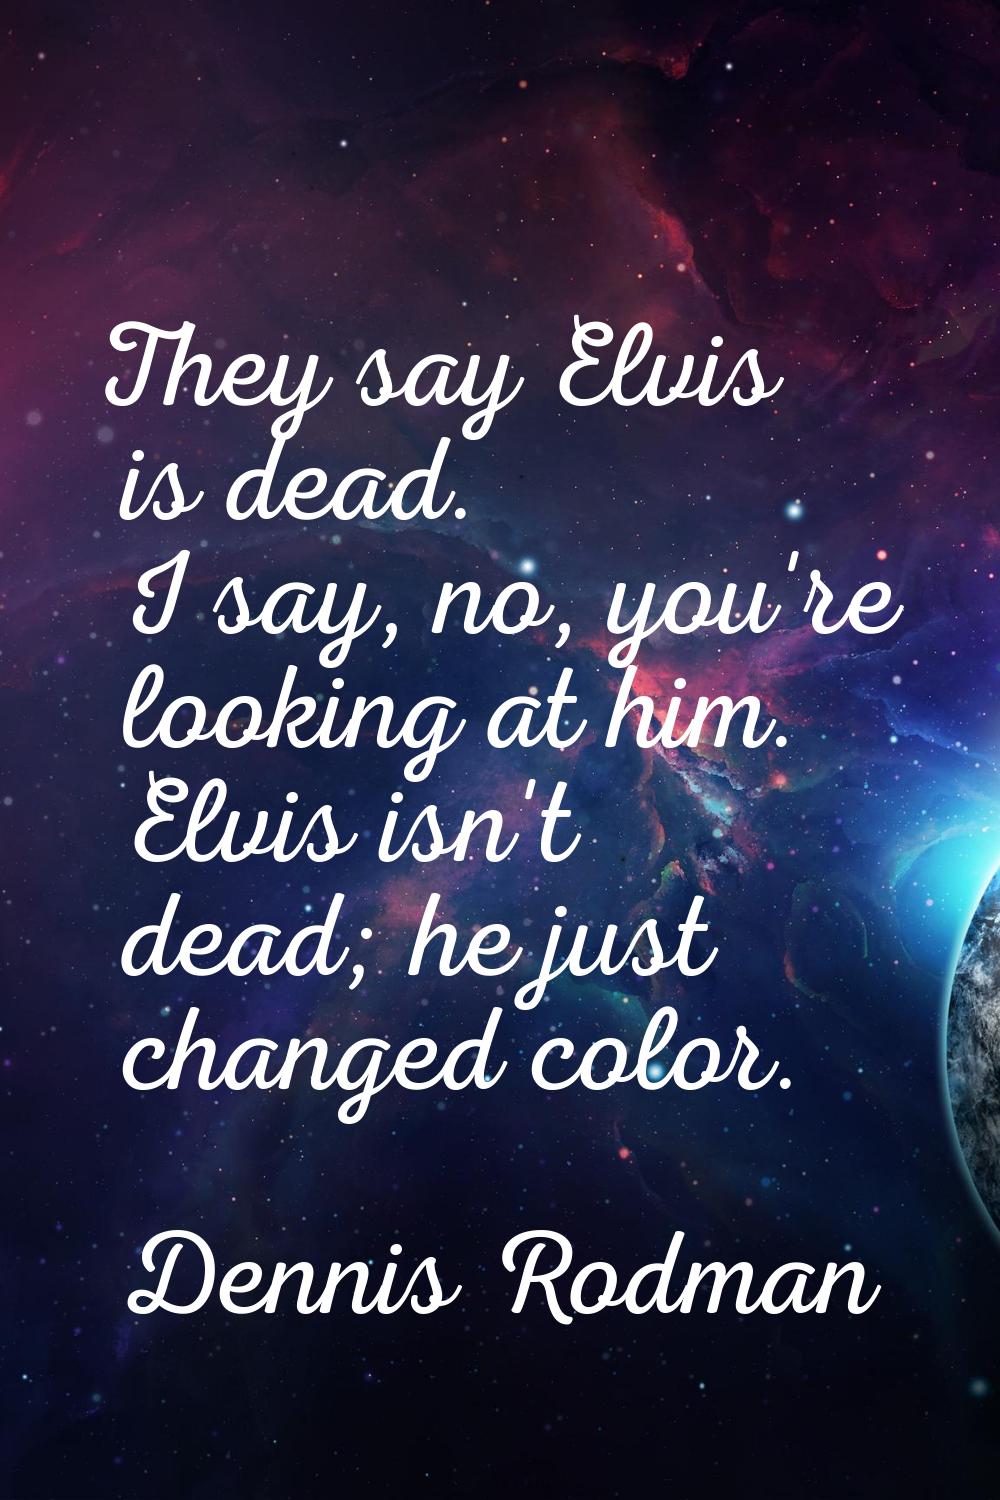 They say Elvis is dead. I say, no, you're looking at him. Elvis isn't dead; he just changed color.